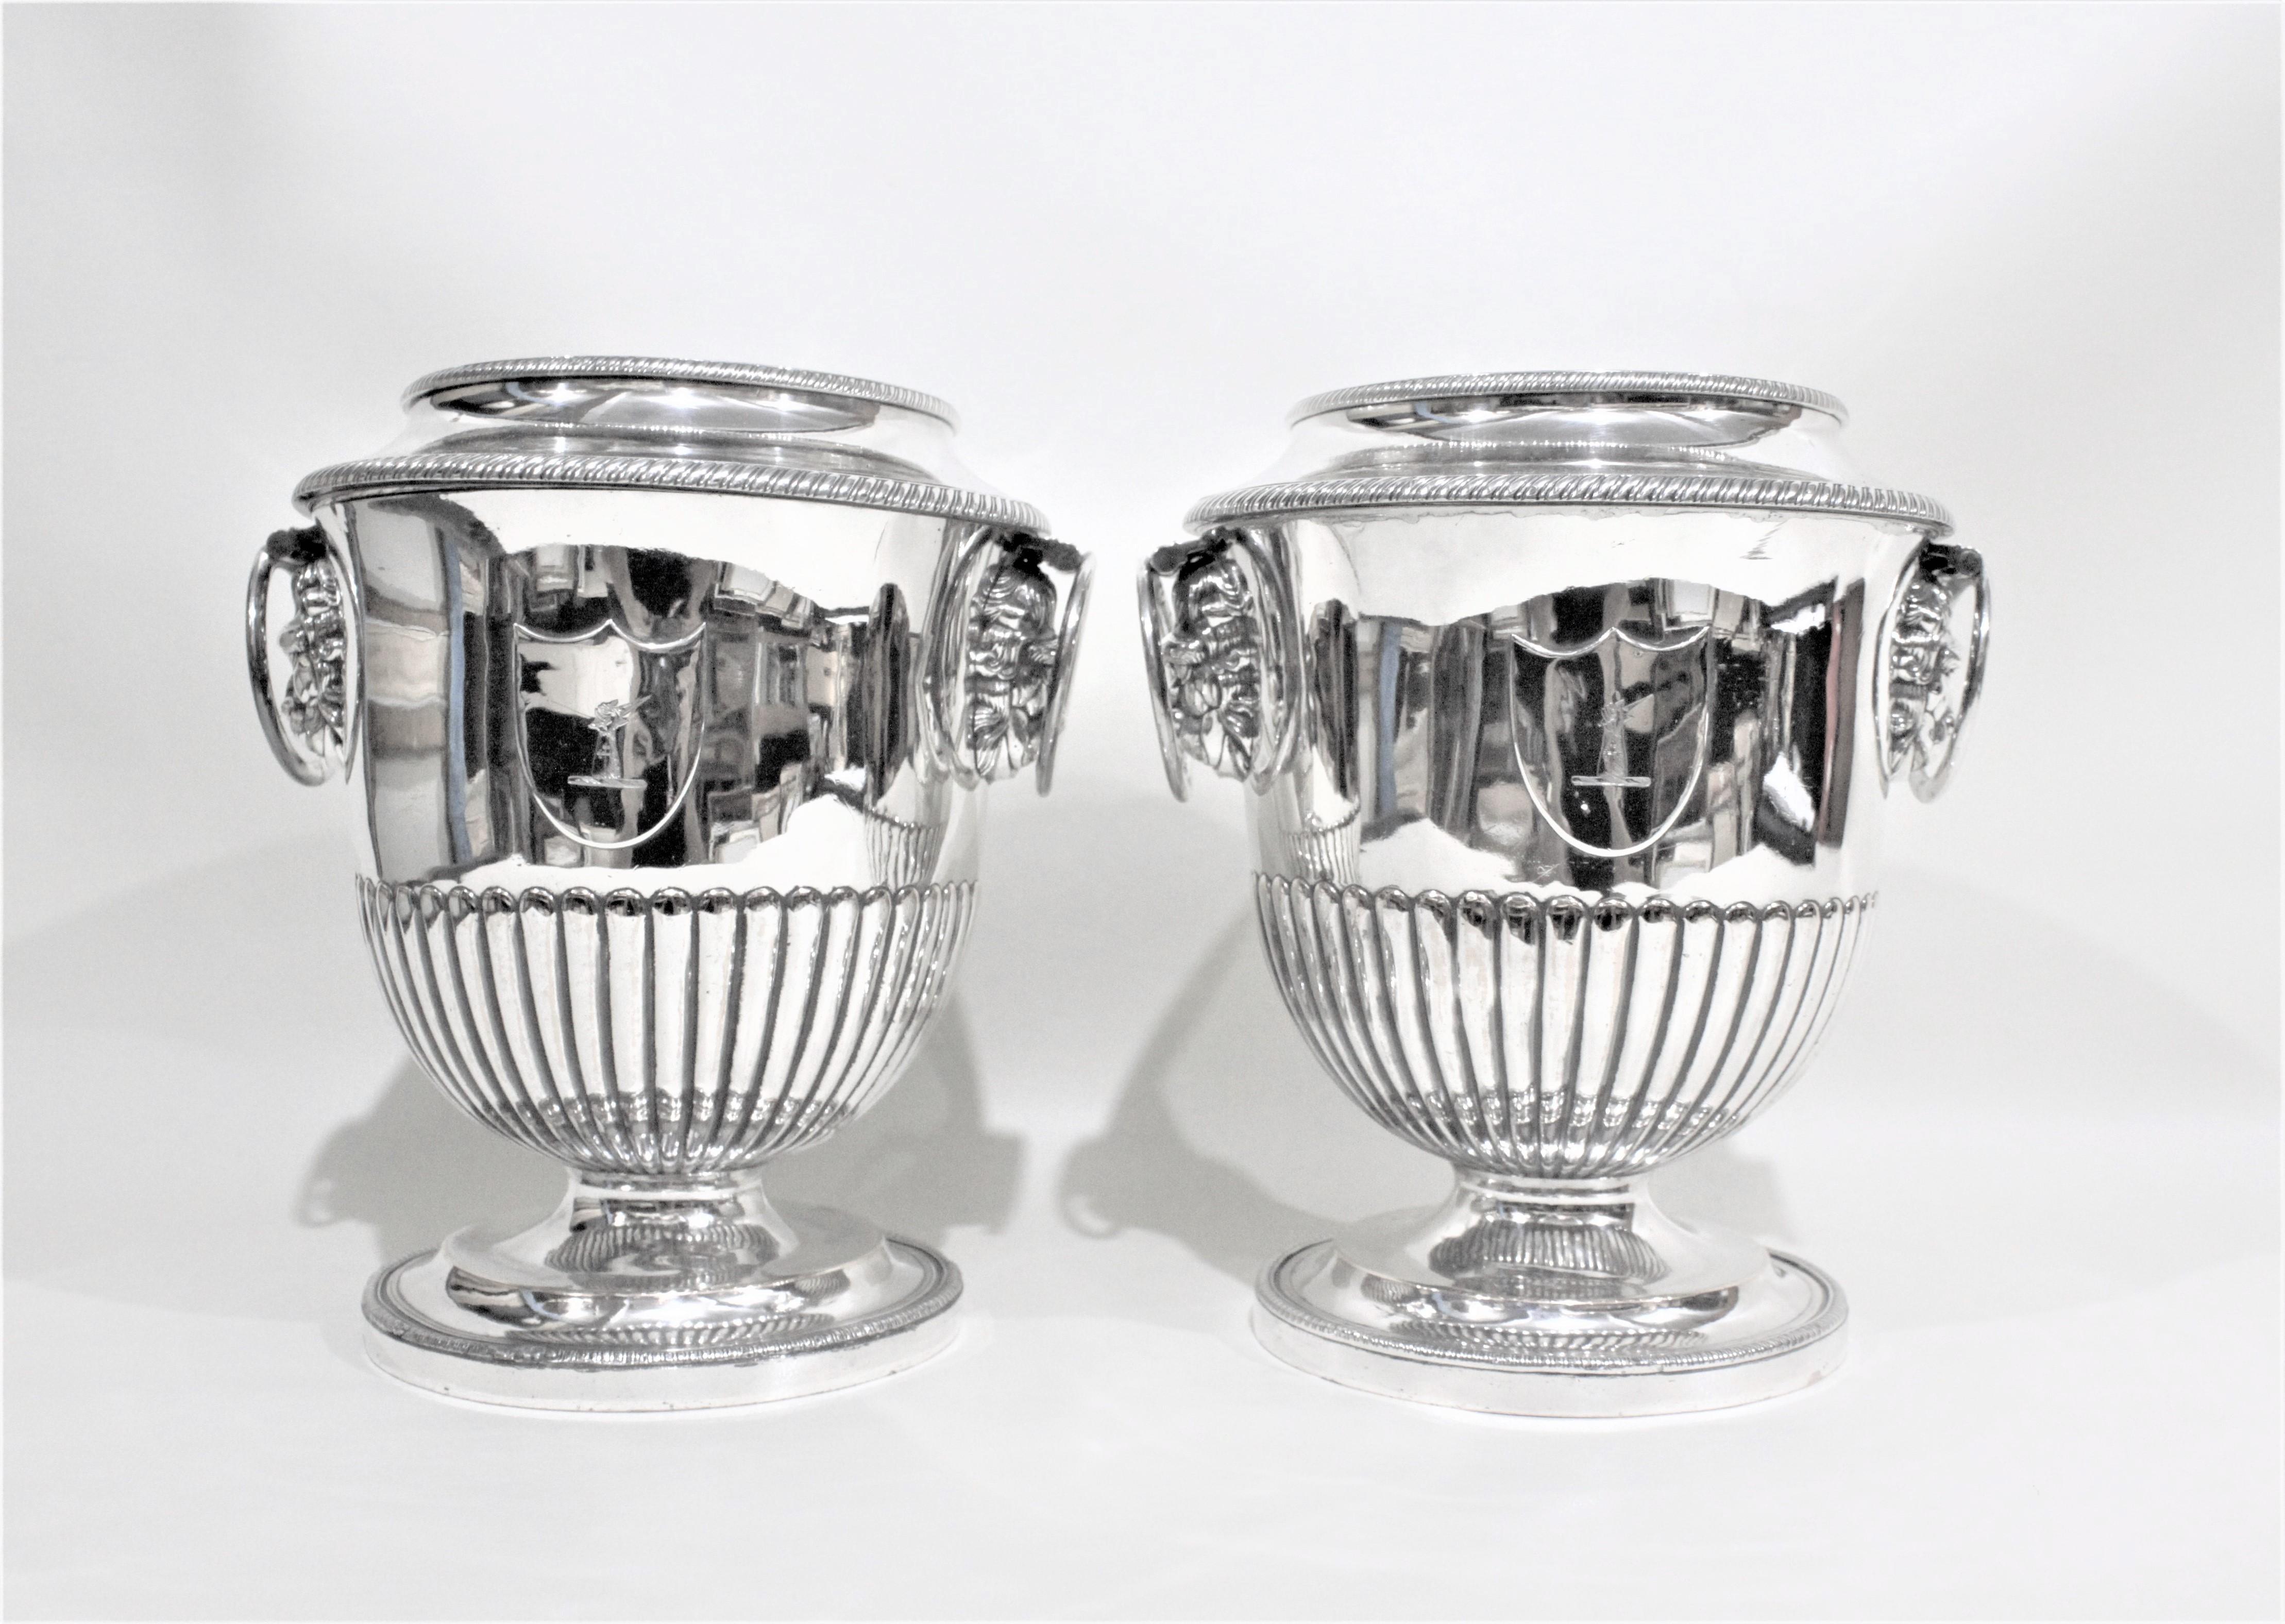 This matched pair of antique wine coolers are unsigned, but presumed to have been made in England between 1800-1820. These wine coolers are done in the Regency style with Sheffield silver plate and have lion head accents under each handle. These